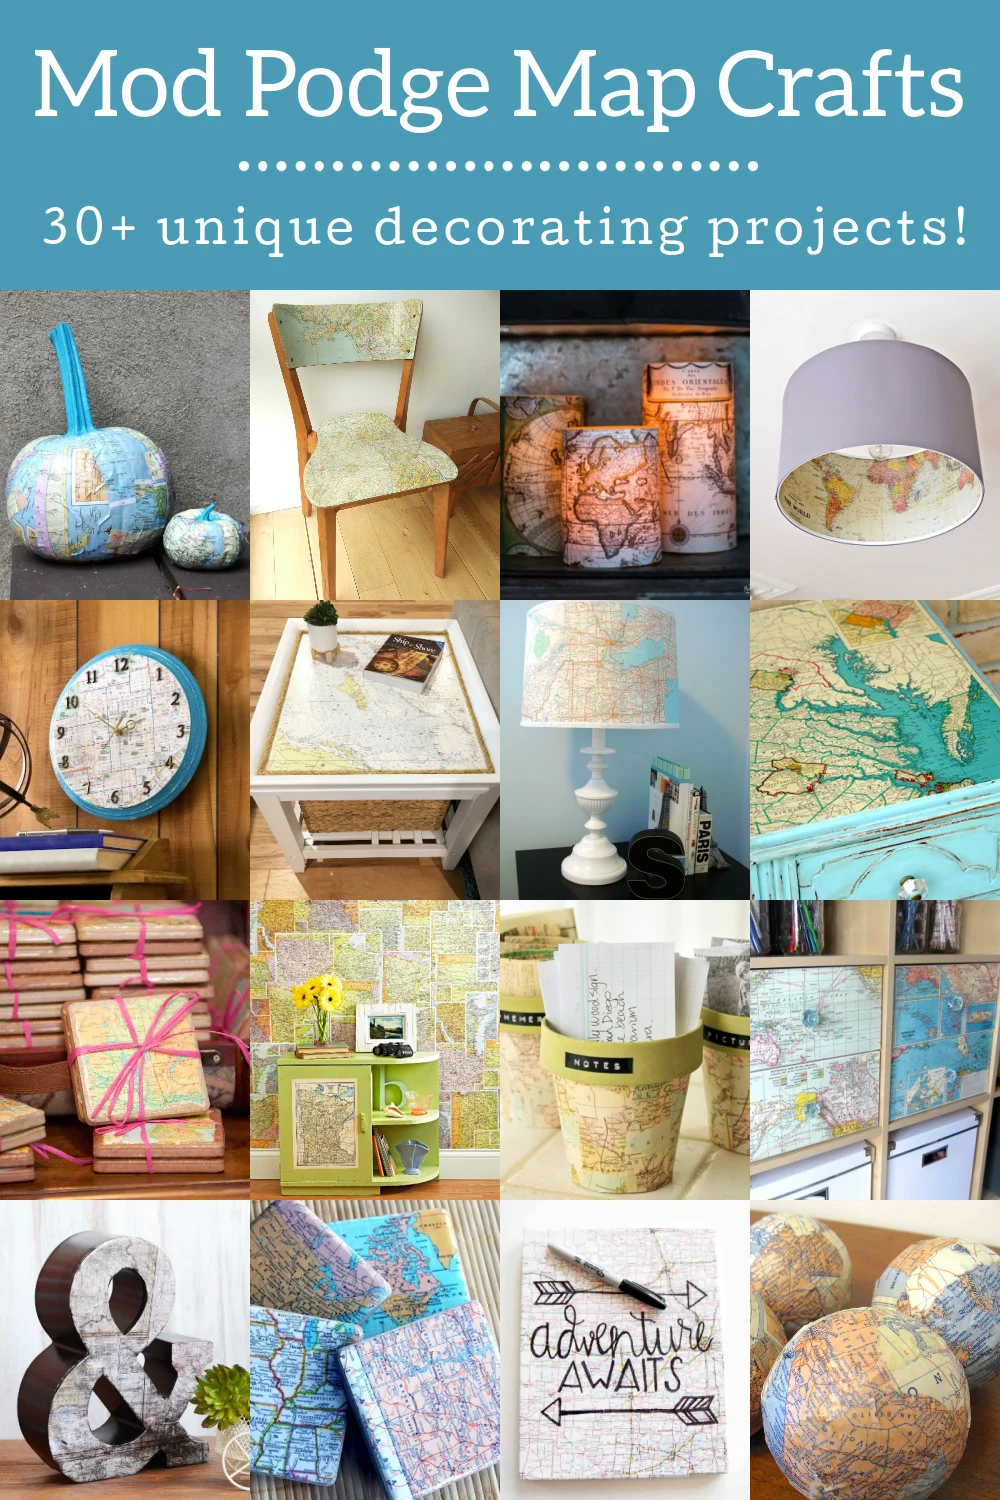 50 Decoupage Ideas You'll HAVE to Try! - Mod Podge Rocks